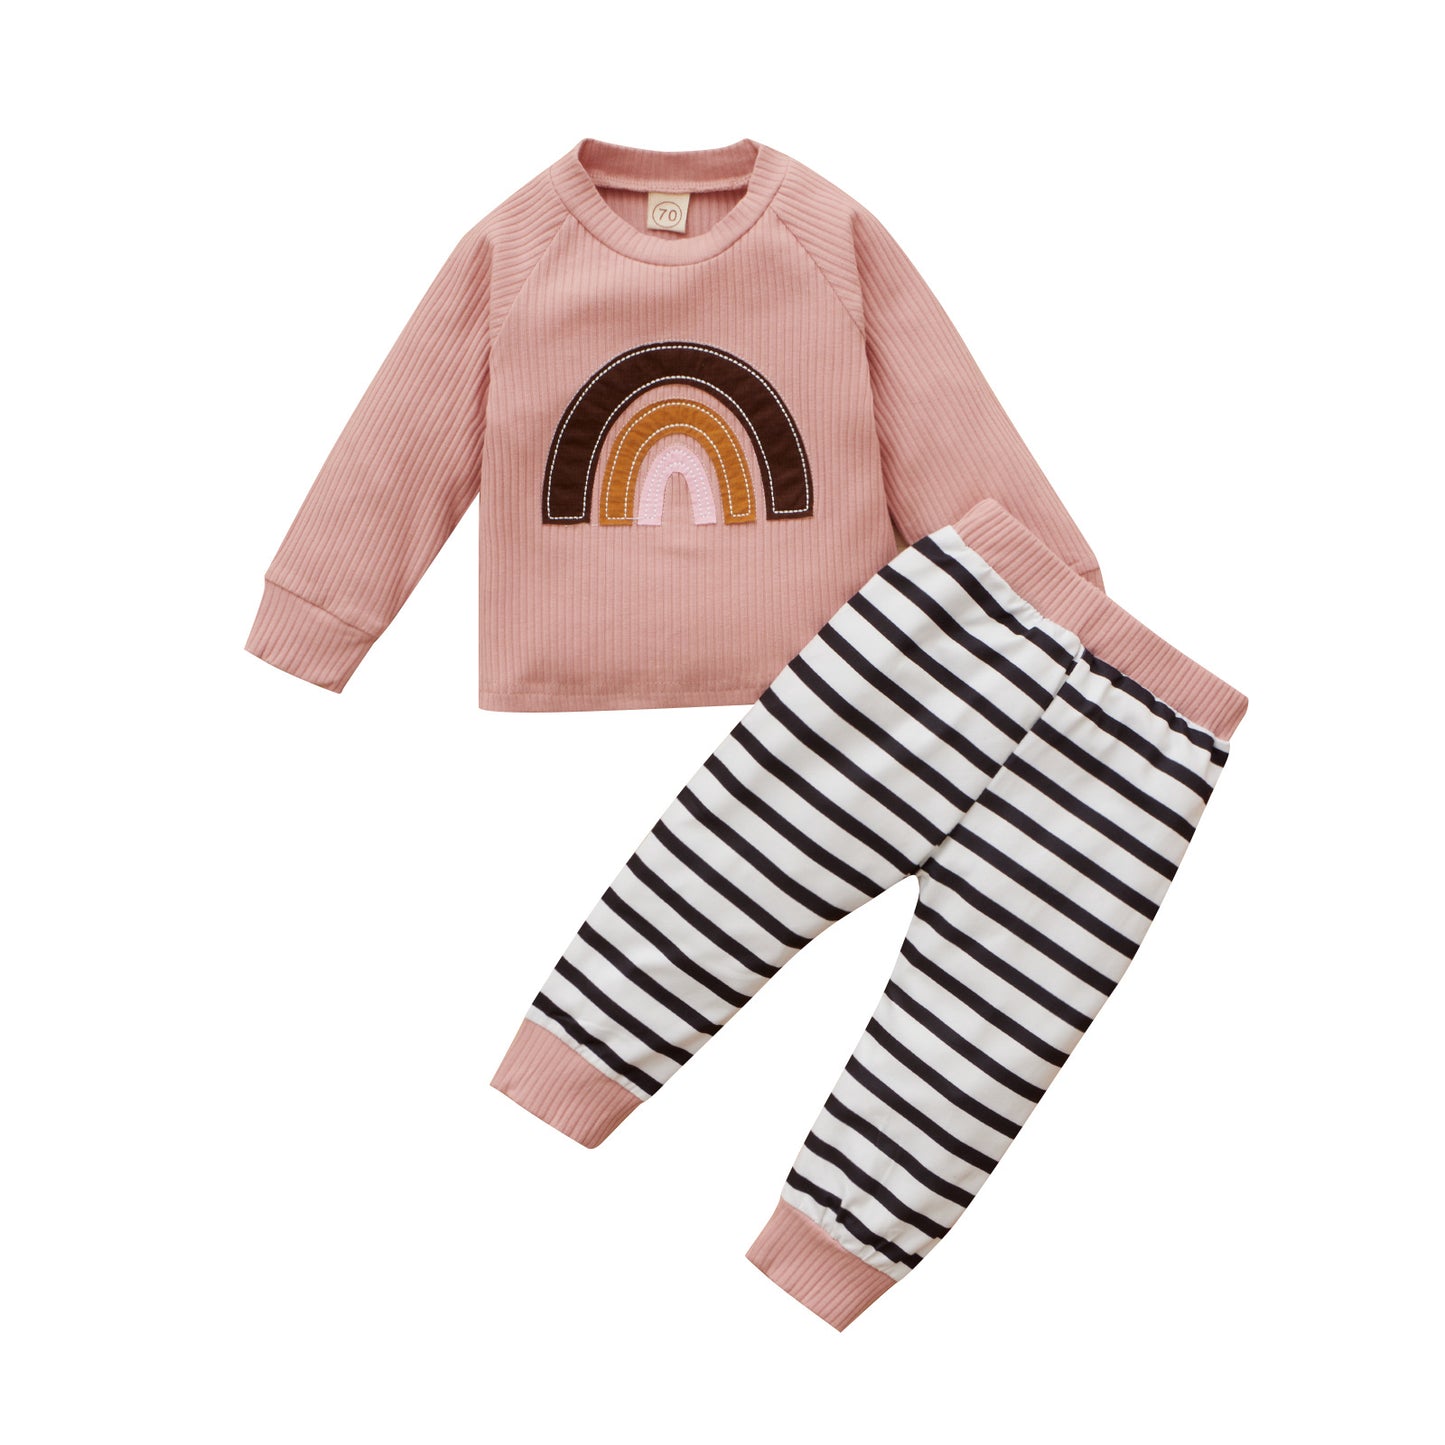 Lively Cotton Sweater and Trousers Suit with Rainbow Pattern